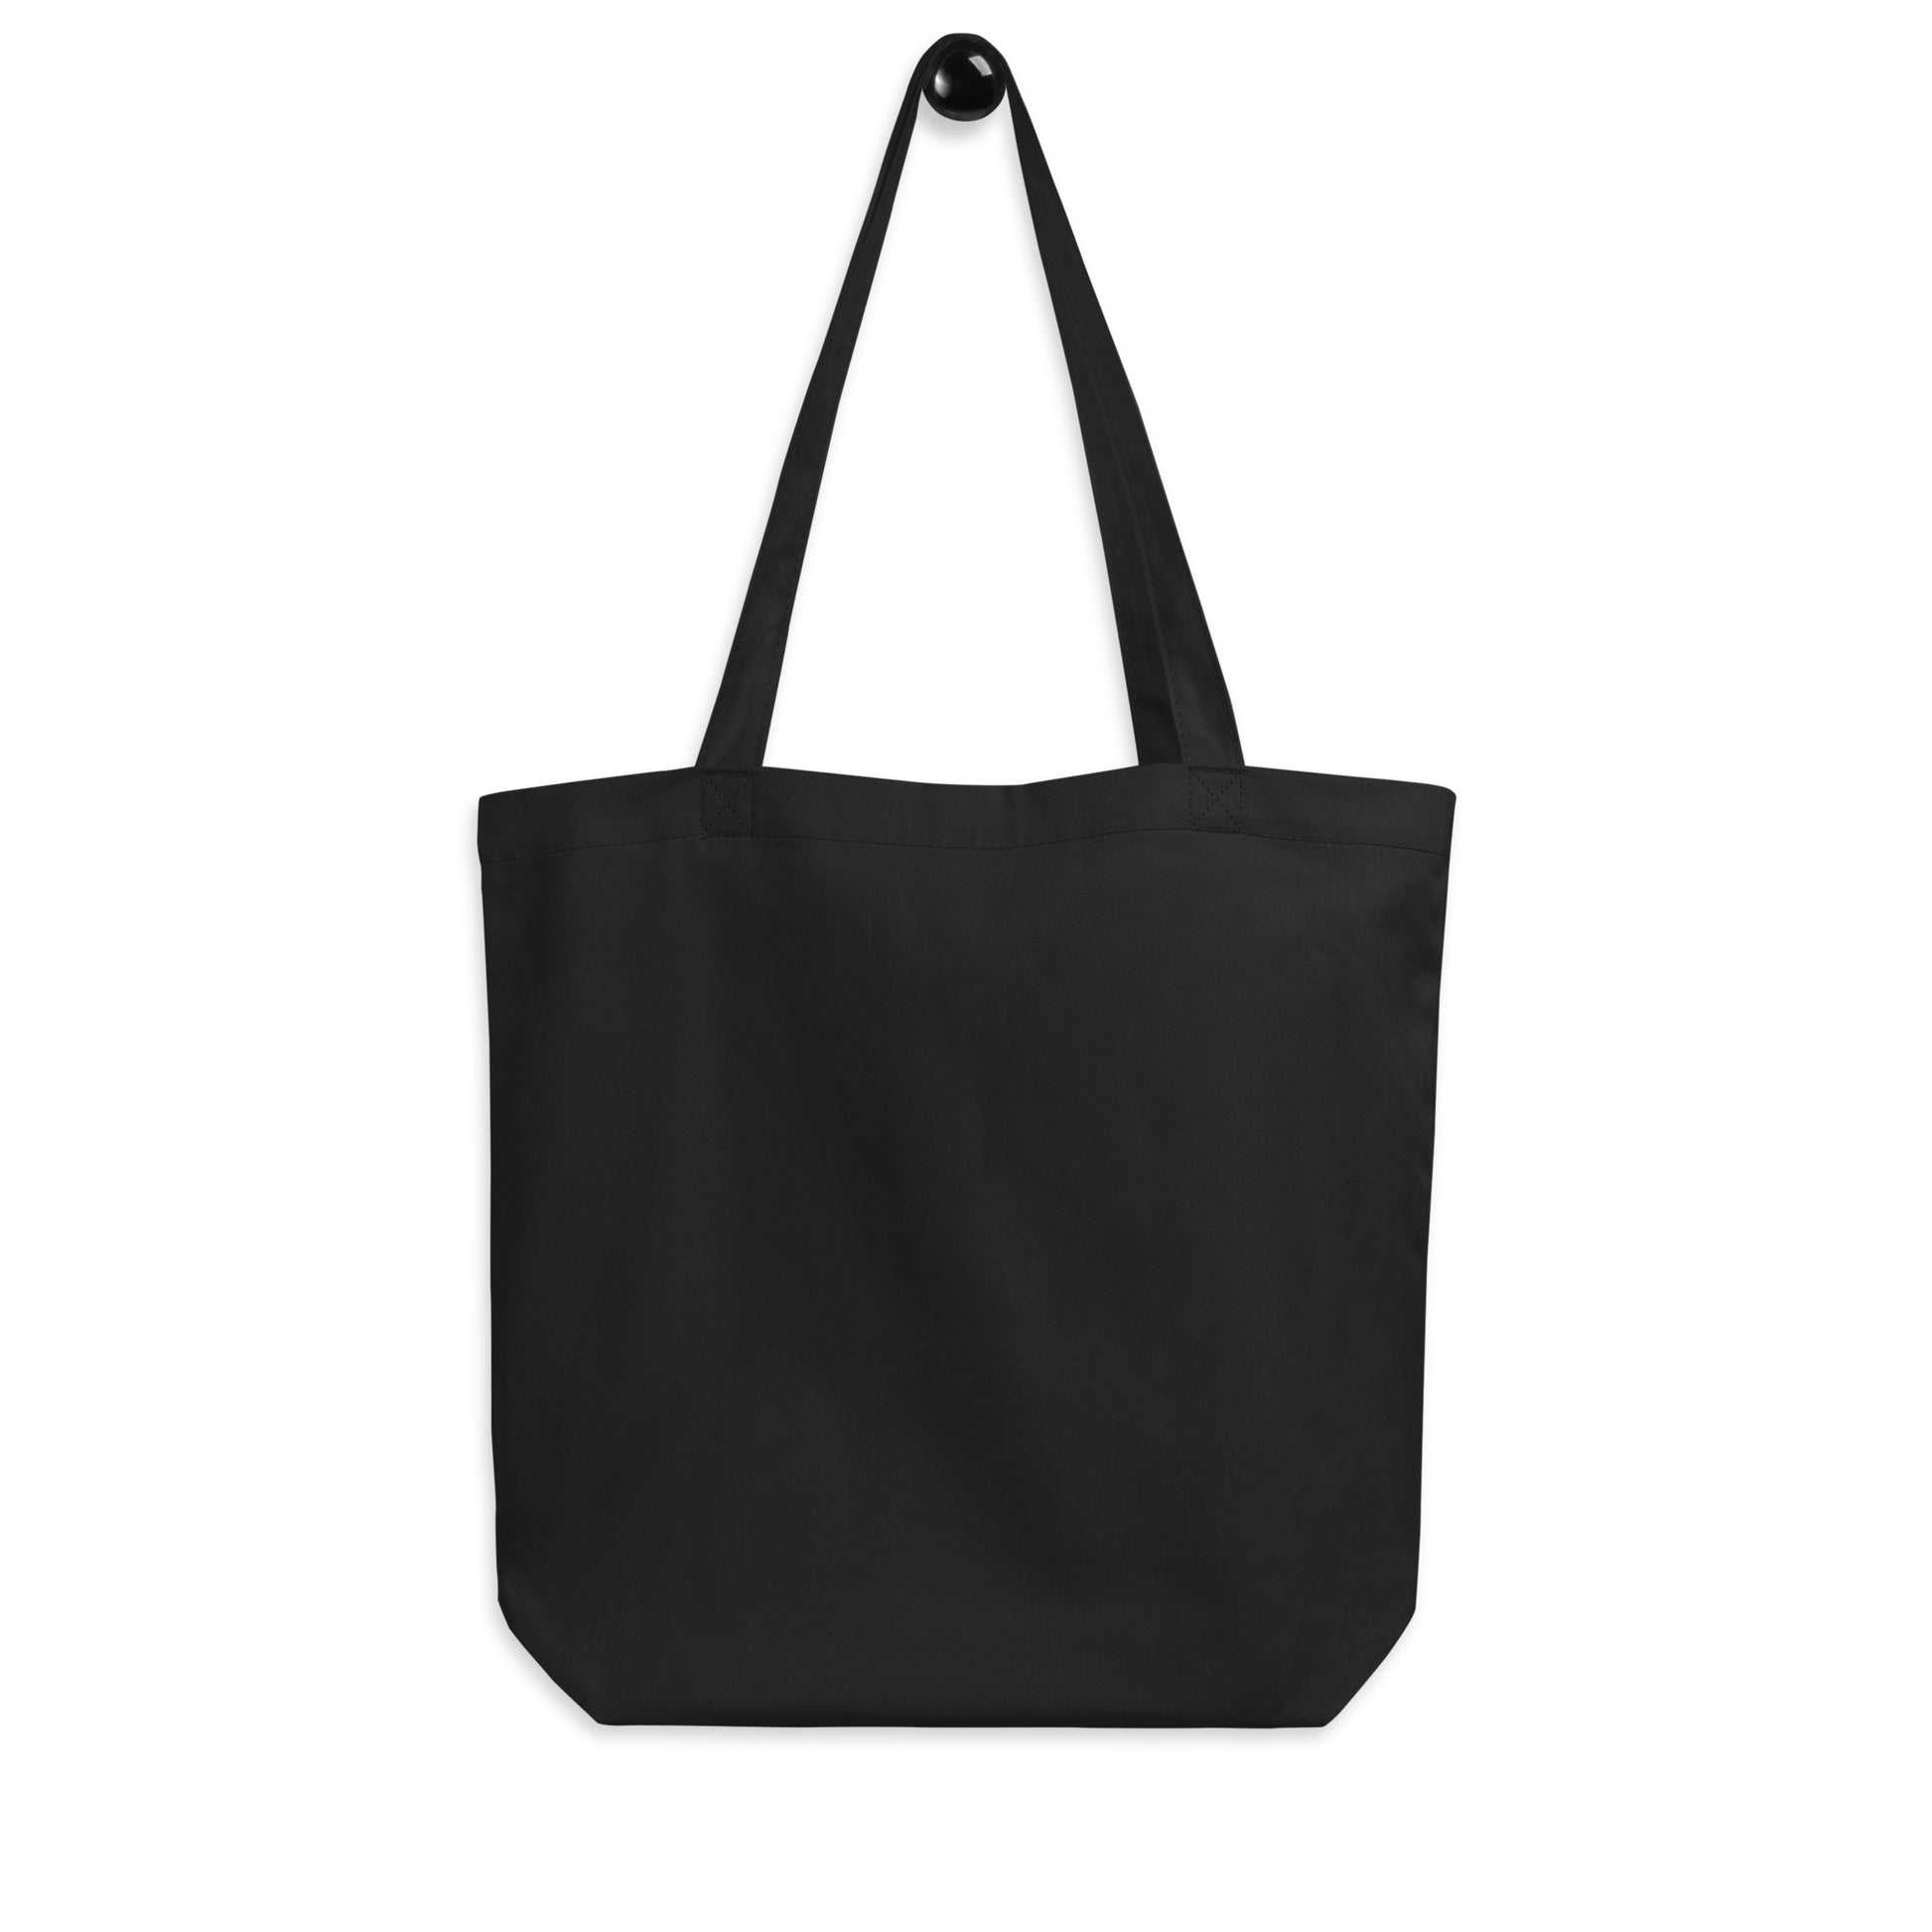 Unique Travel Gift Organic Tote - White Oval • HEL Helsinki • YHM Designs - Image 05